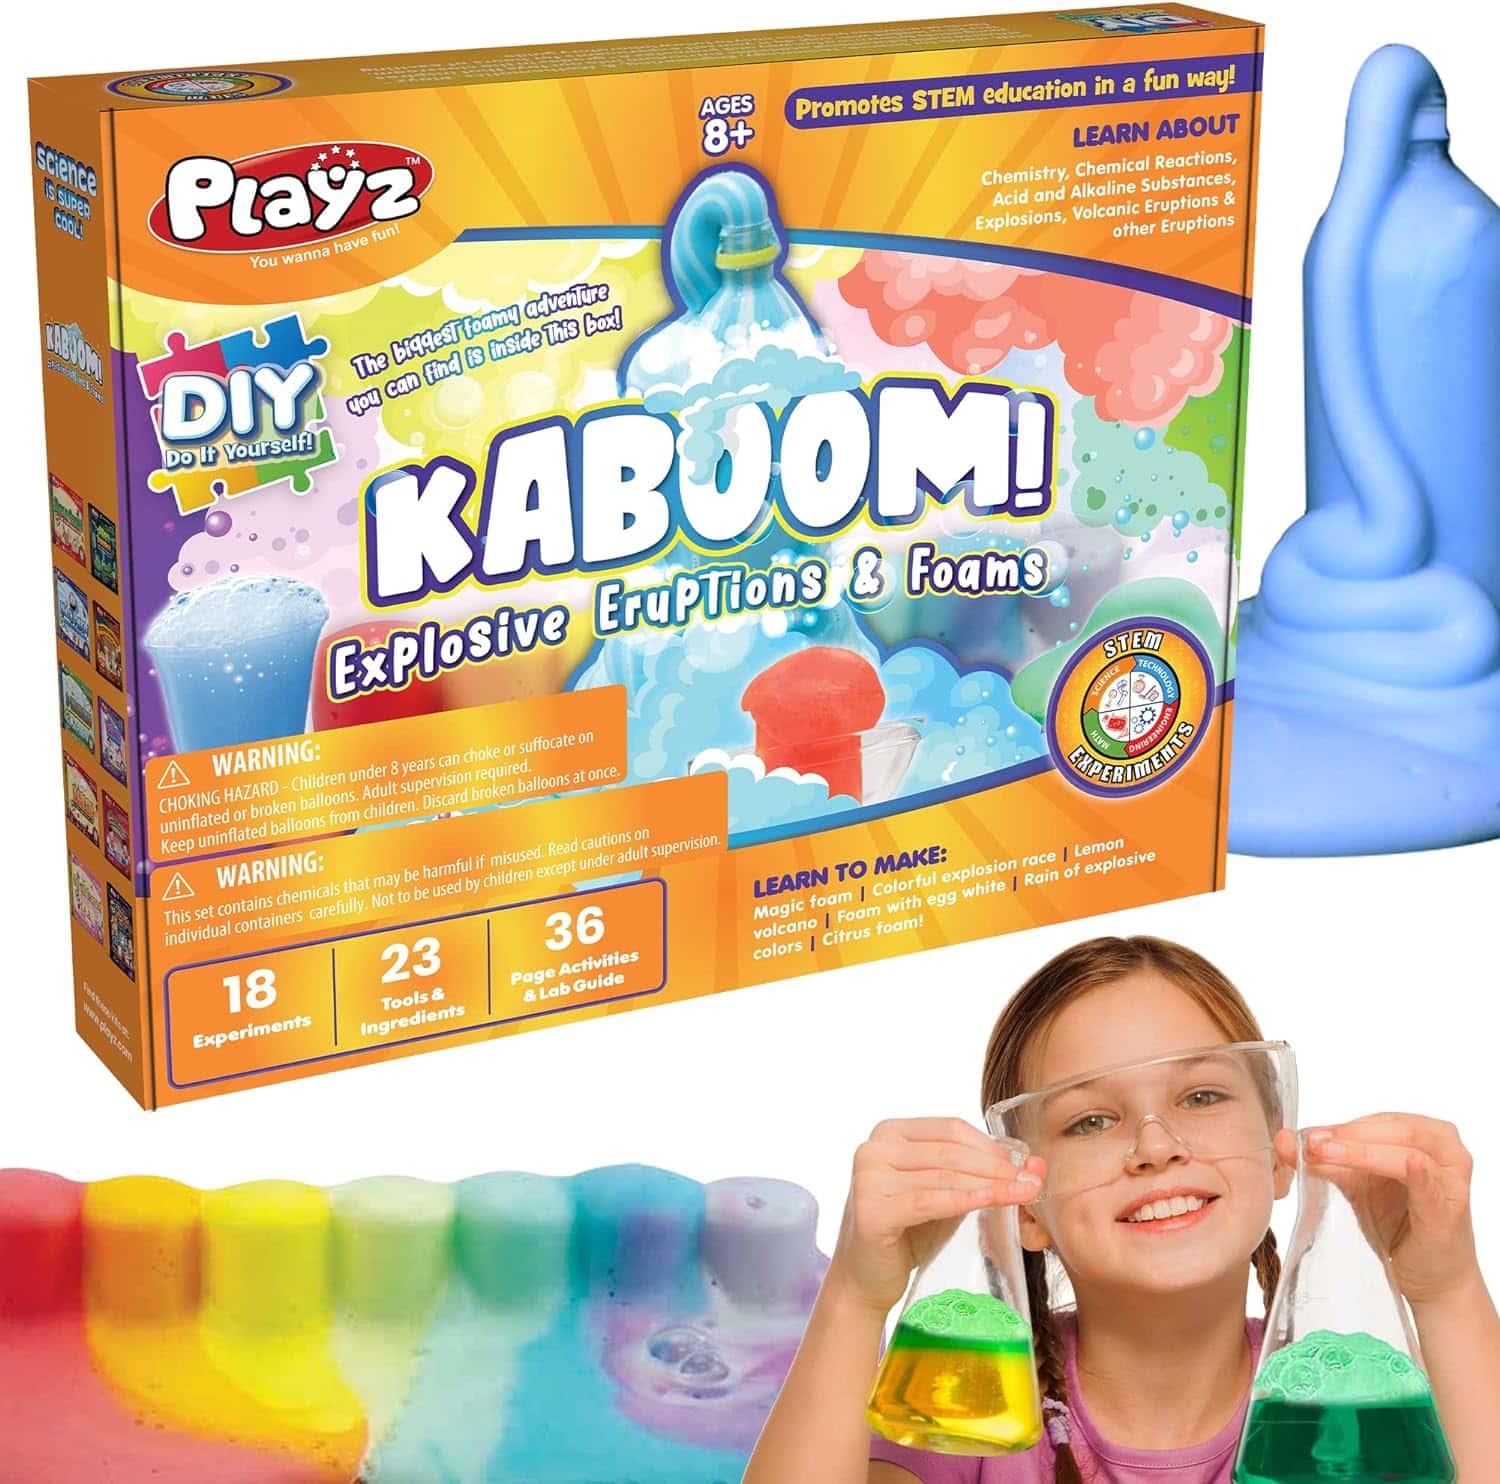 The Playz KABOOM! Explosive Eruptions and Foam Bombs